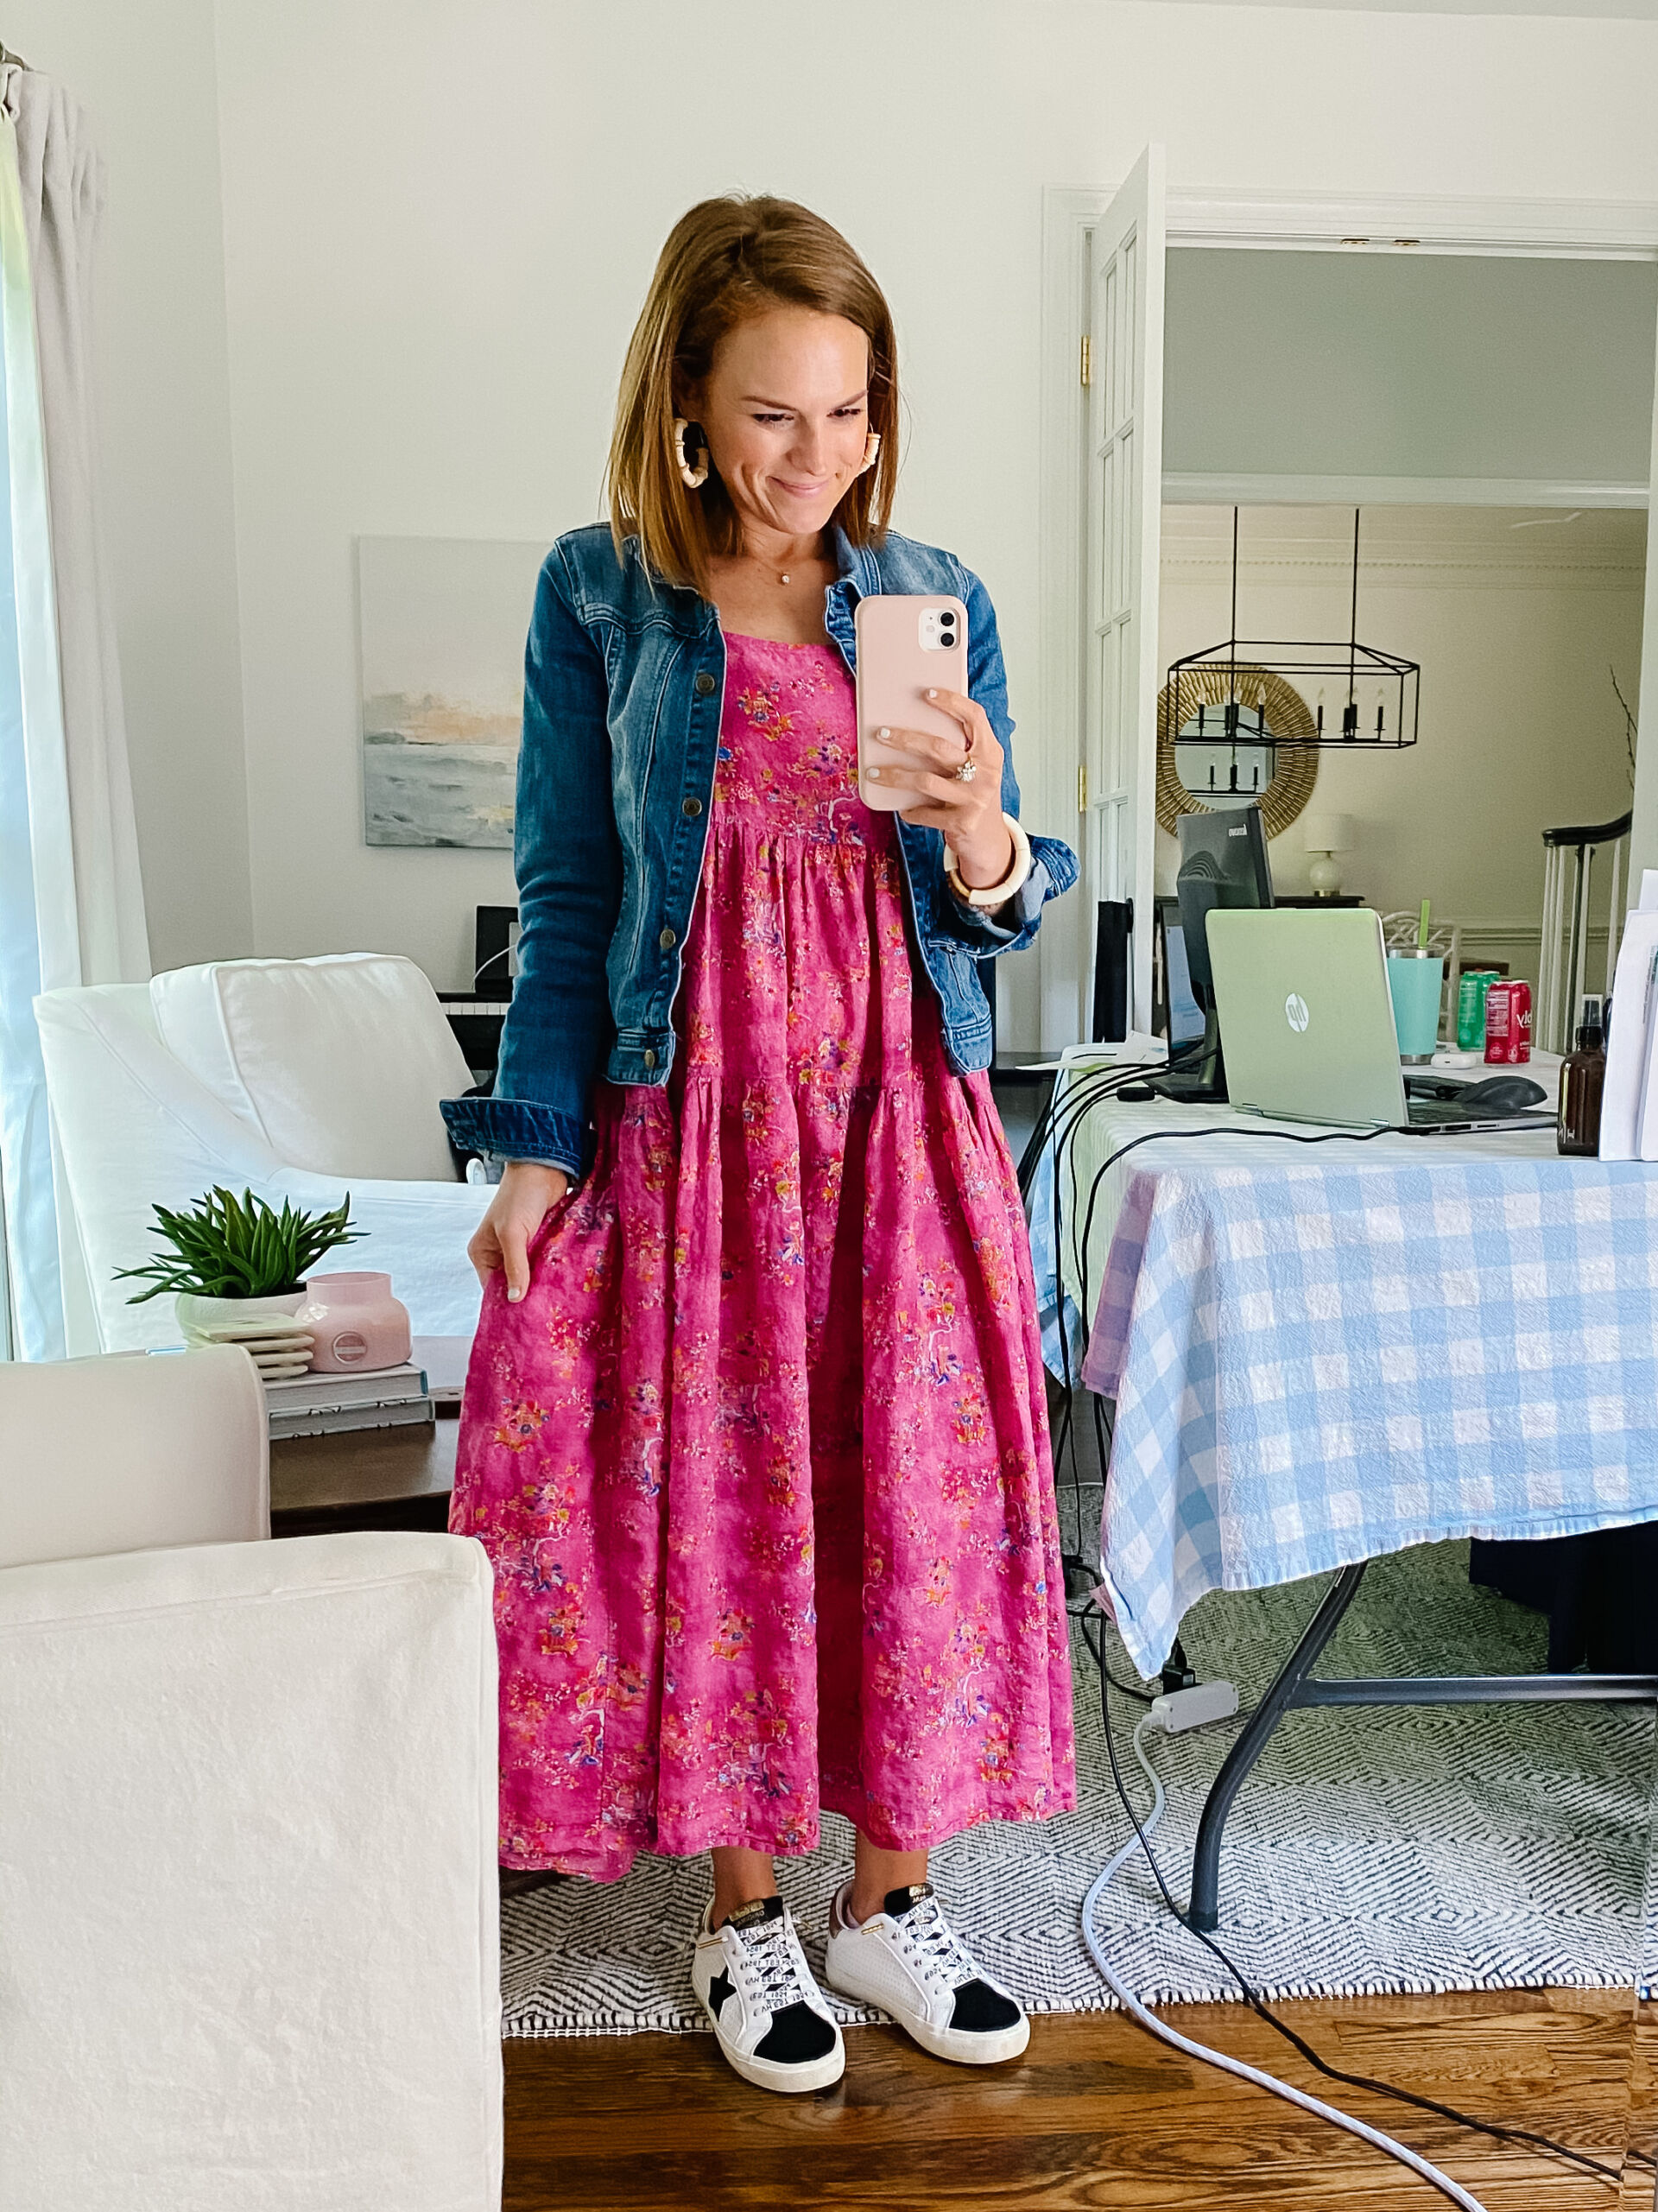 Need a little wardrobe update this Spring? Carolina Charm is sharing her top favorite Amazon Spring Dresses HERE!